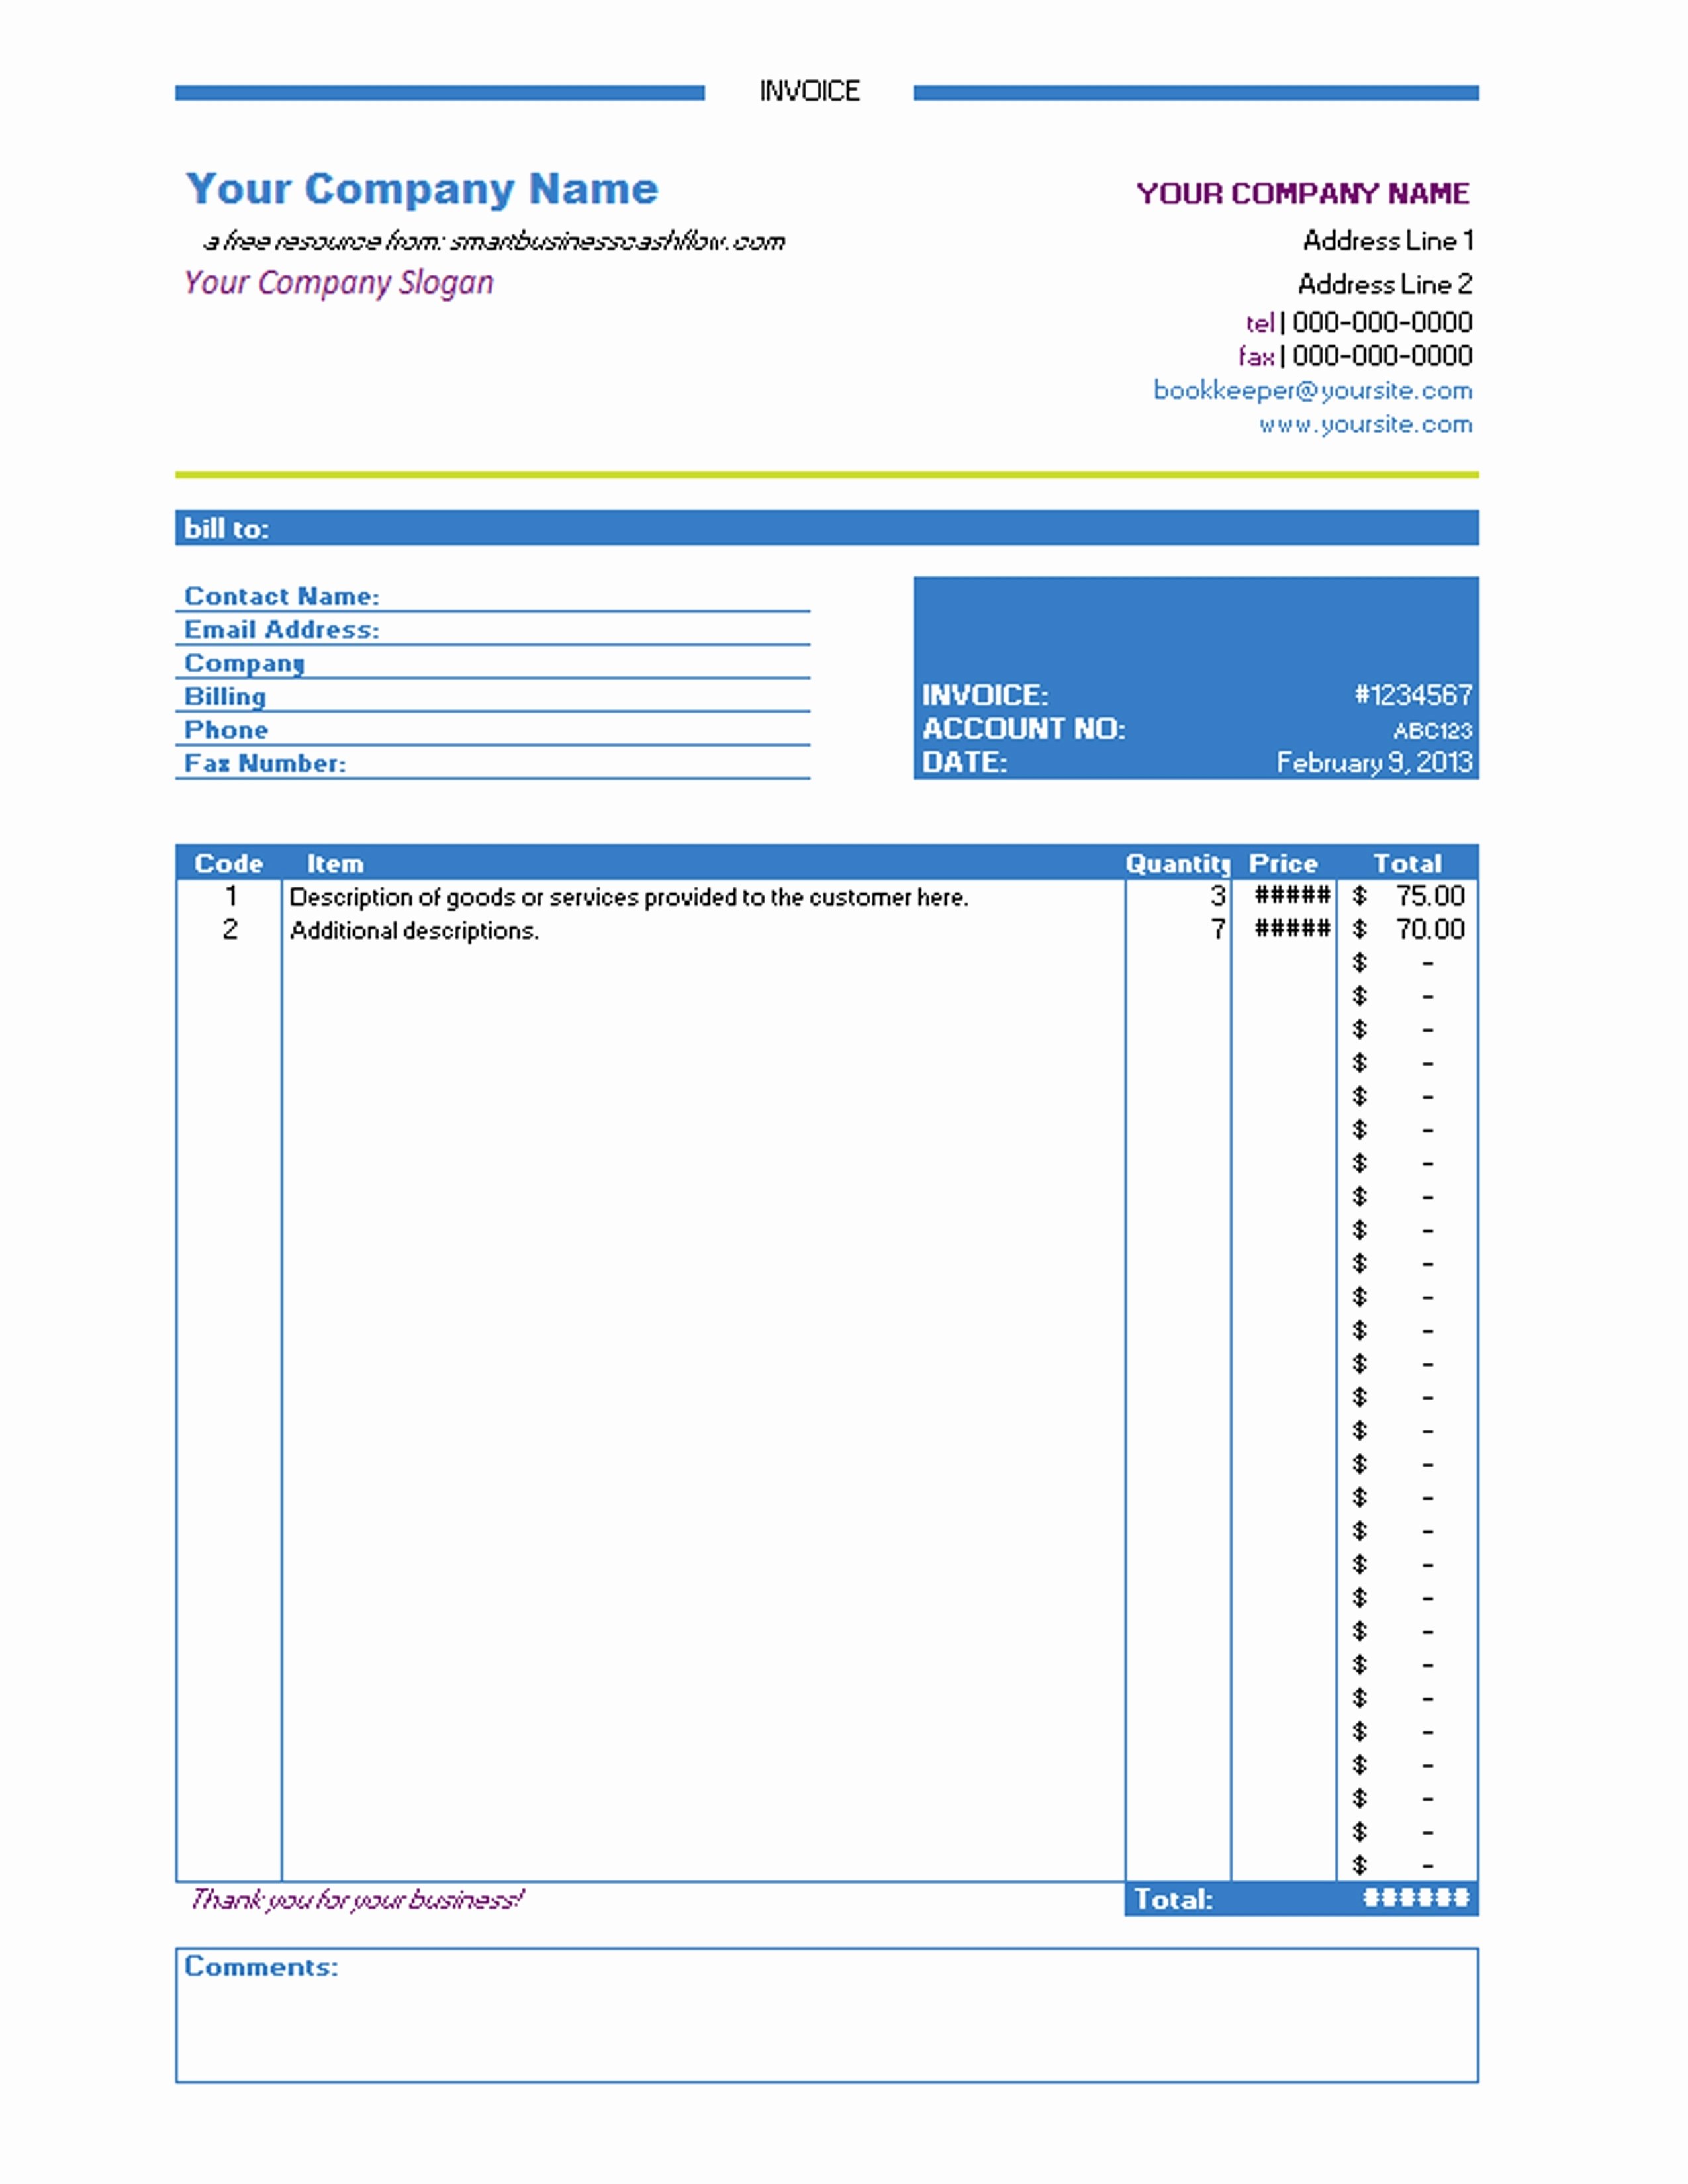 Sample Invoice Template Excel Awesome Invoice Template Free Download Excel Invoice Template Ideas